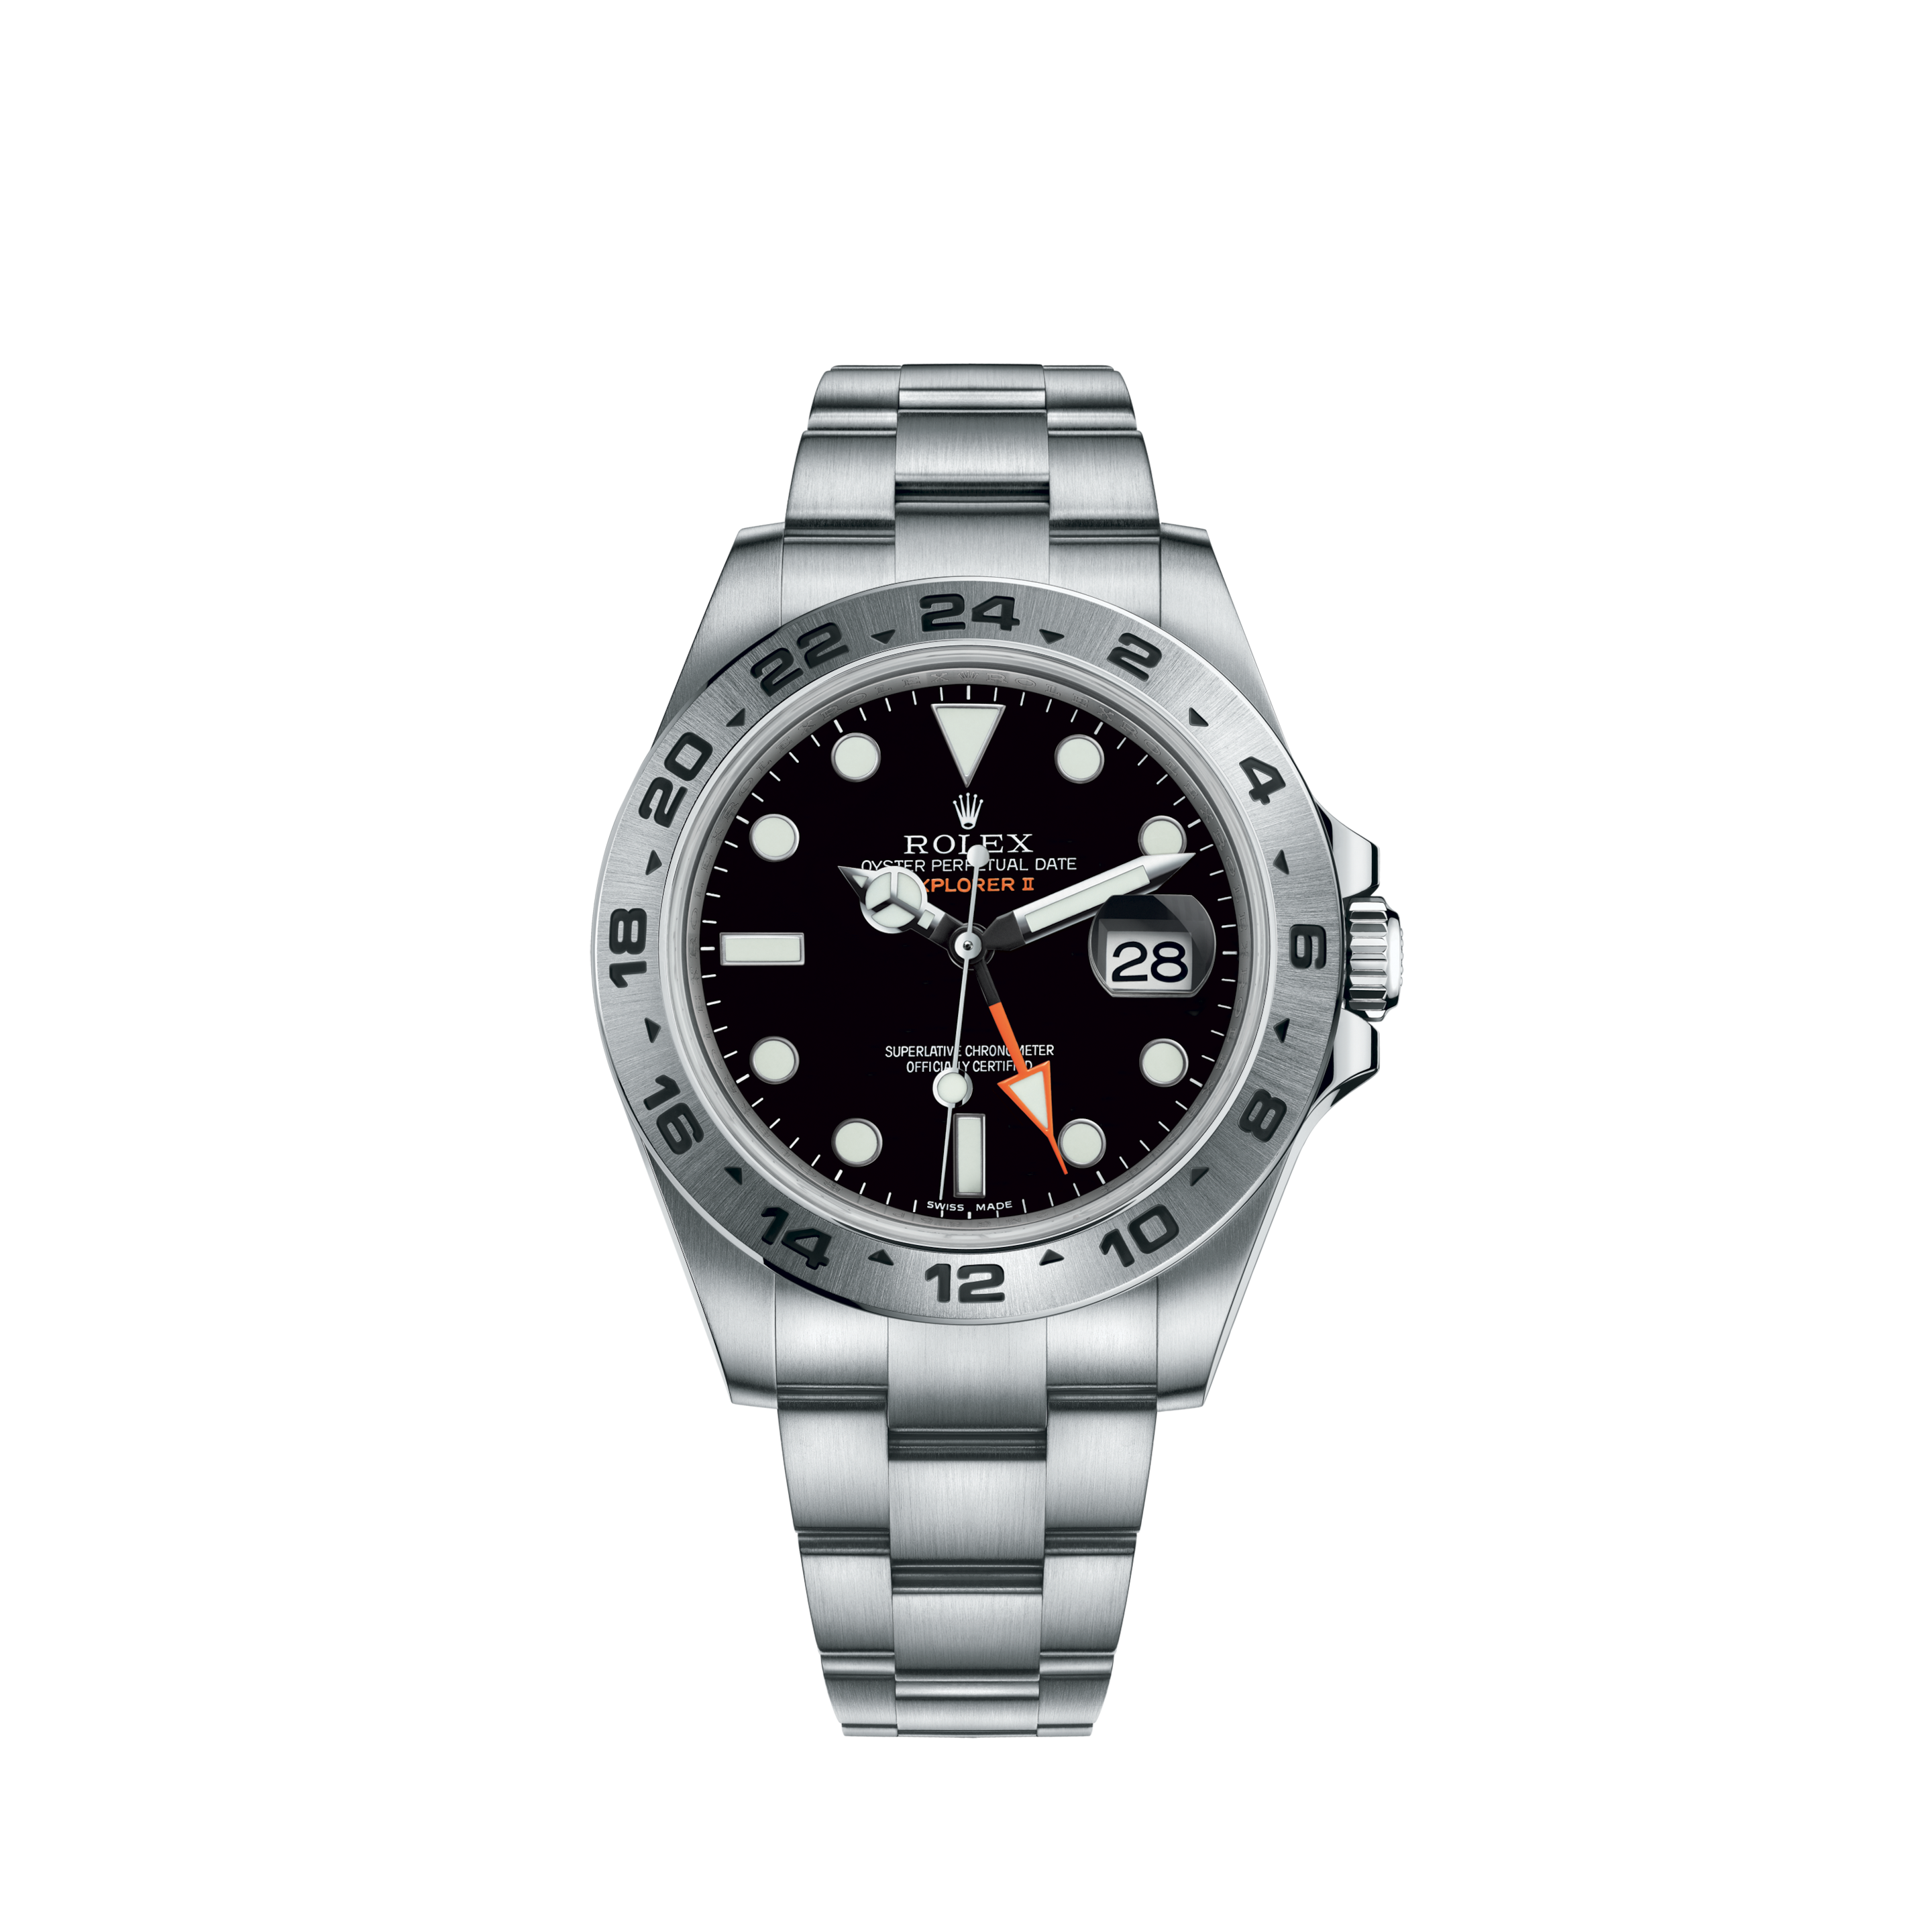 Rolex Datejust 41mm Steel and White Gold - Fluted Bezel 126334 BLRO